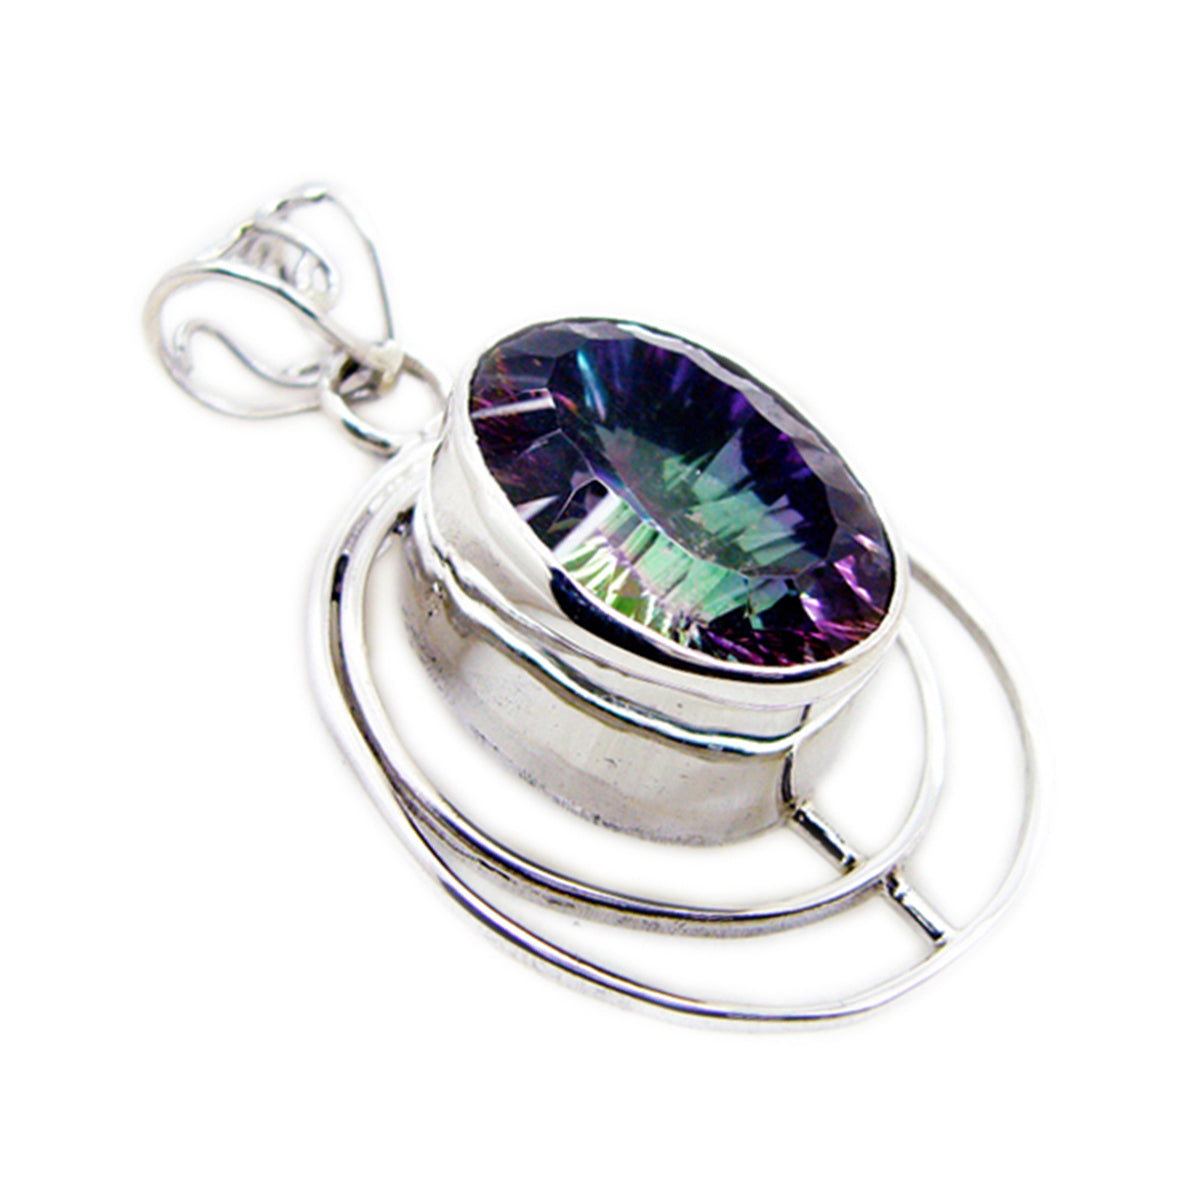 Riyo Engaging Gems Oval Faceted Multi Color Mystic Quartz Silver Pendant Gift For Sister